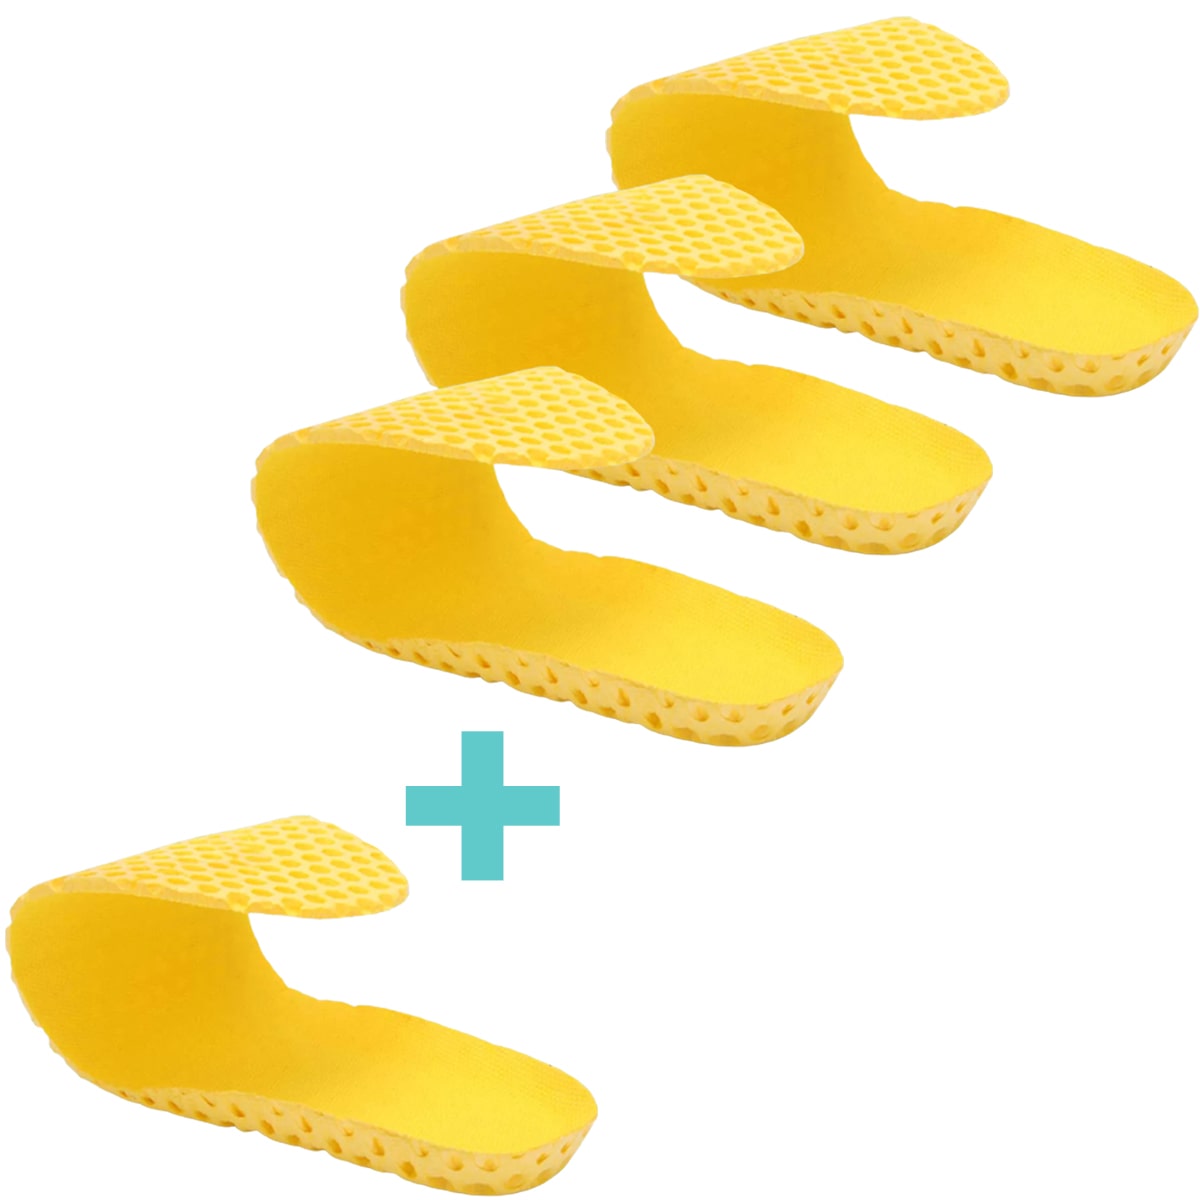 2 replacement insoles for barefoot shoes